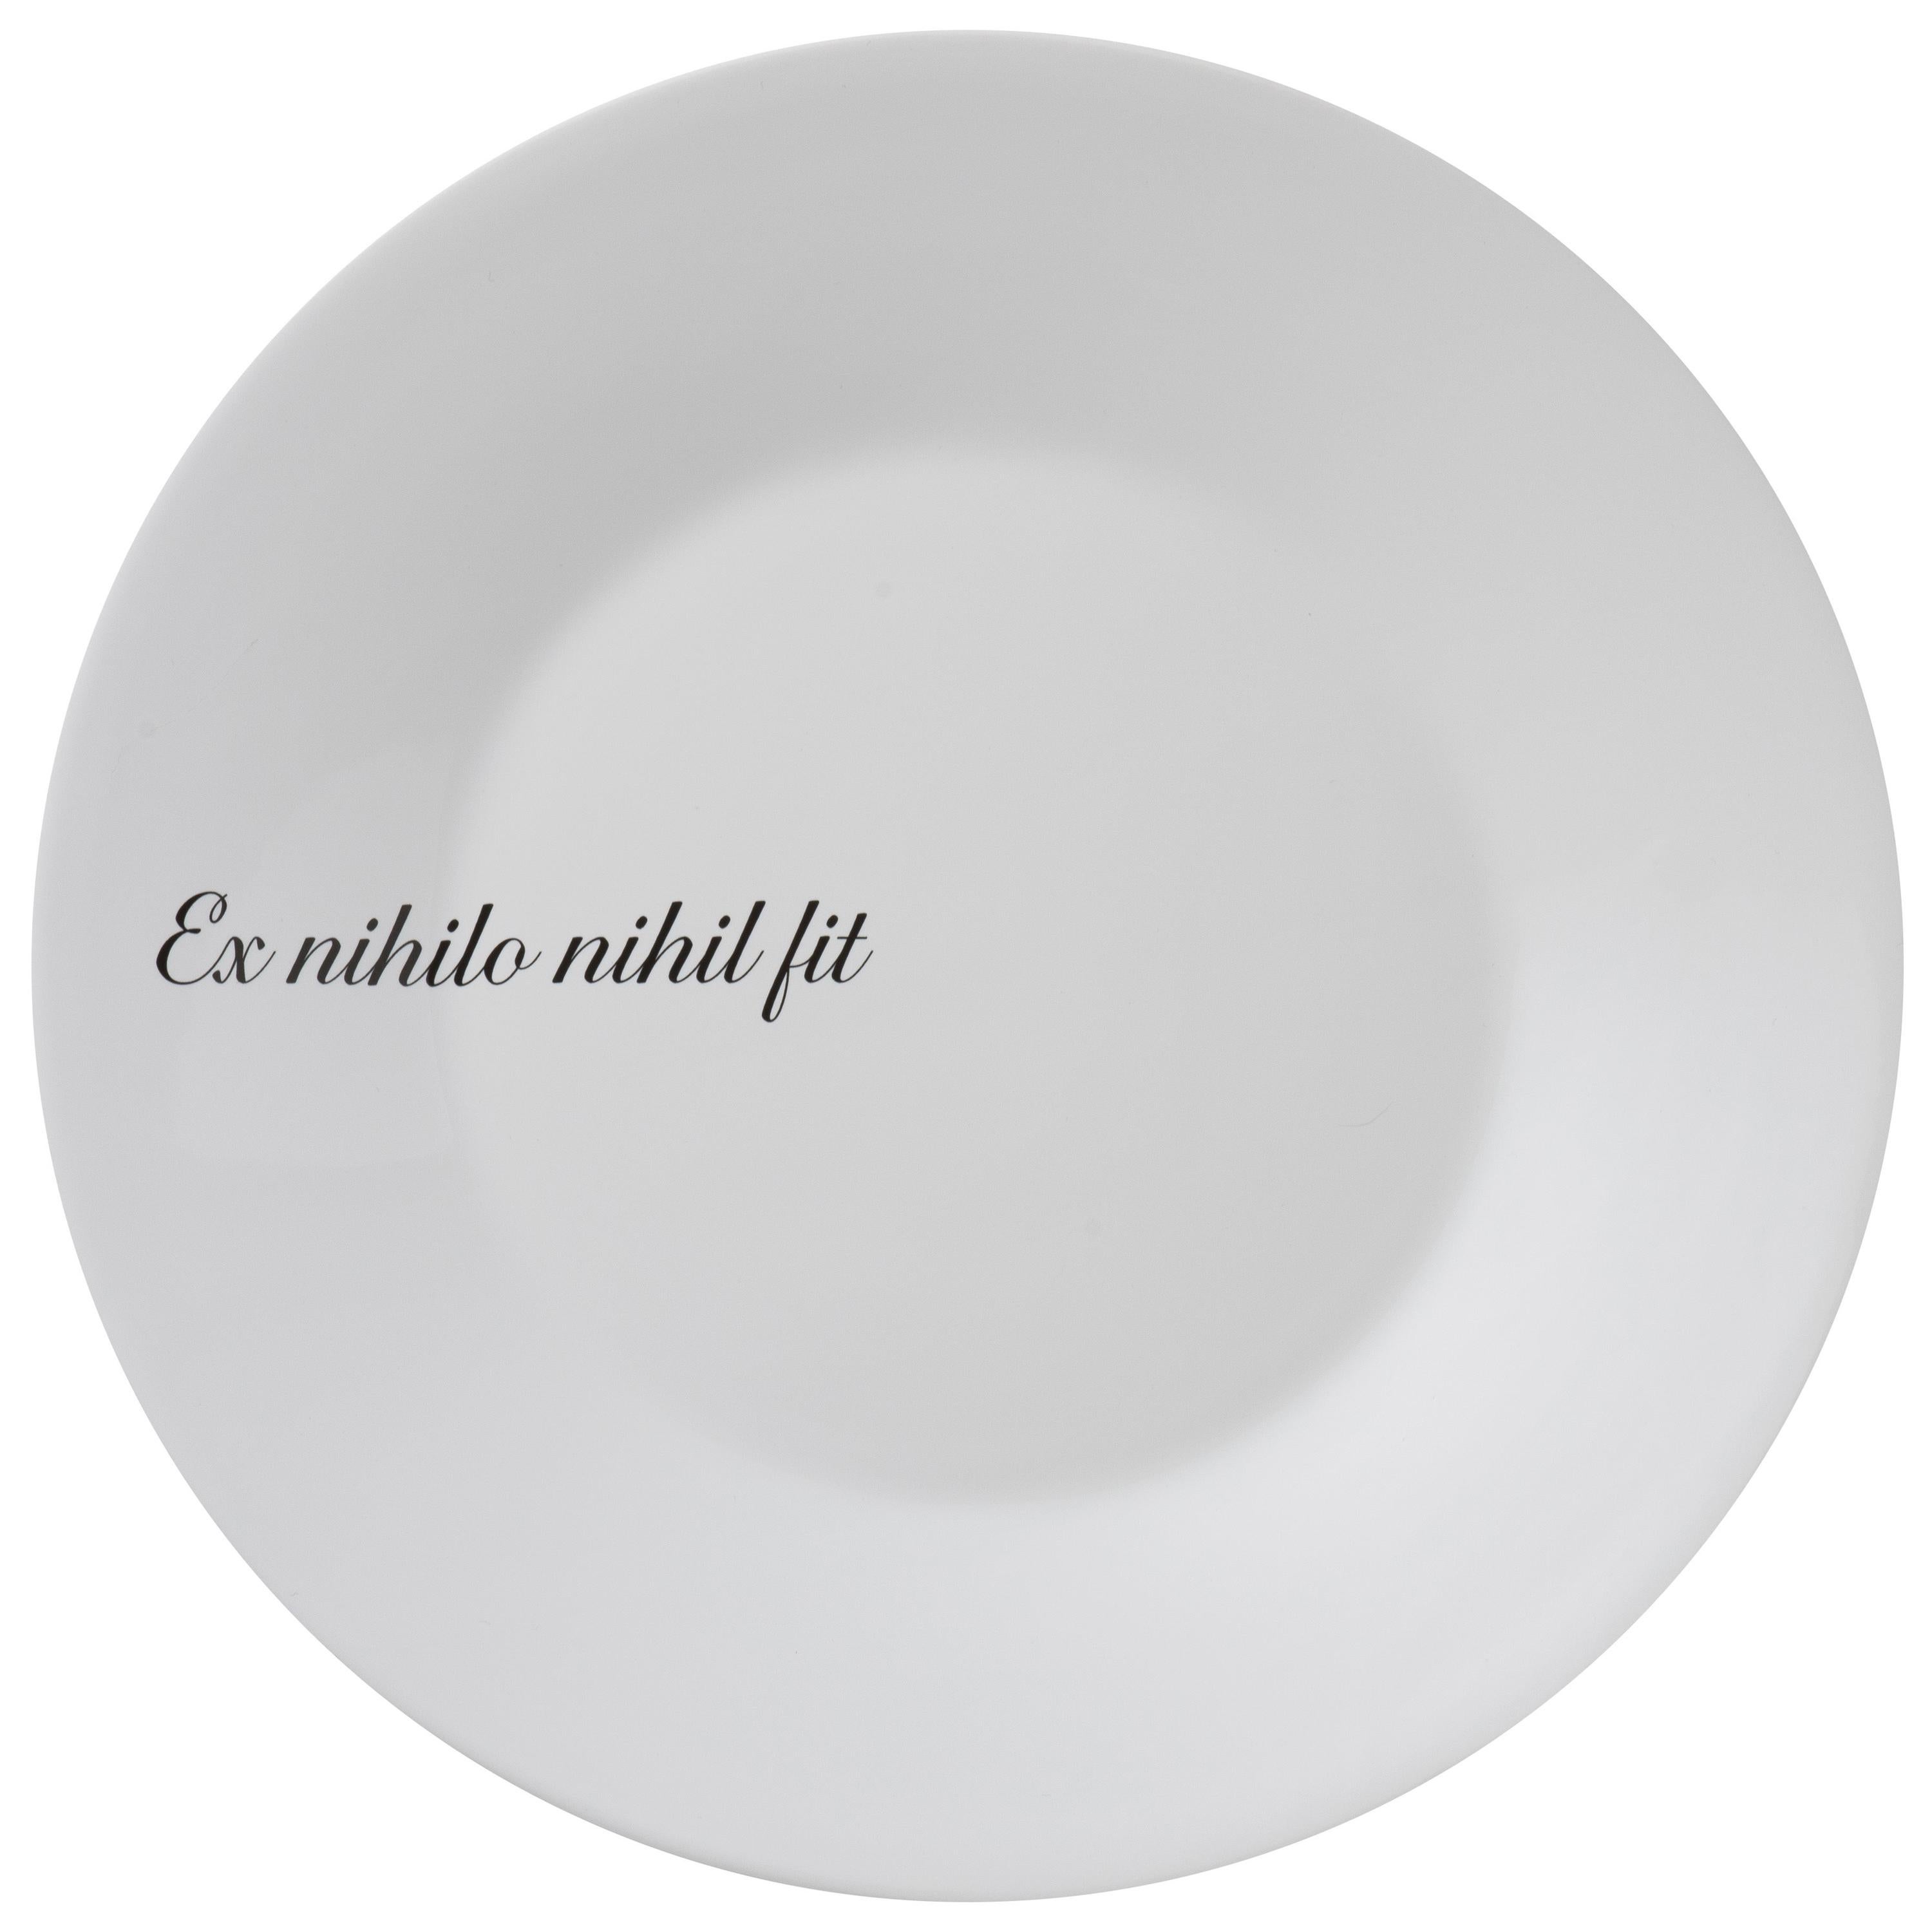 "Ipse Dixit": Crafted in Italy Set of Dinnerware with Famous Latin Mottos For Sale